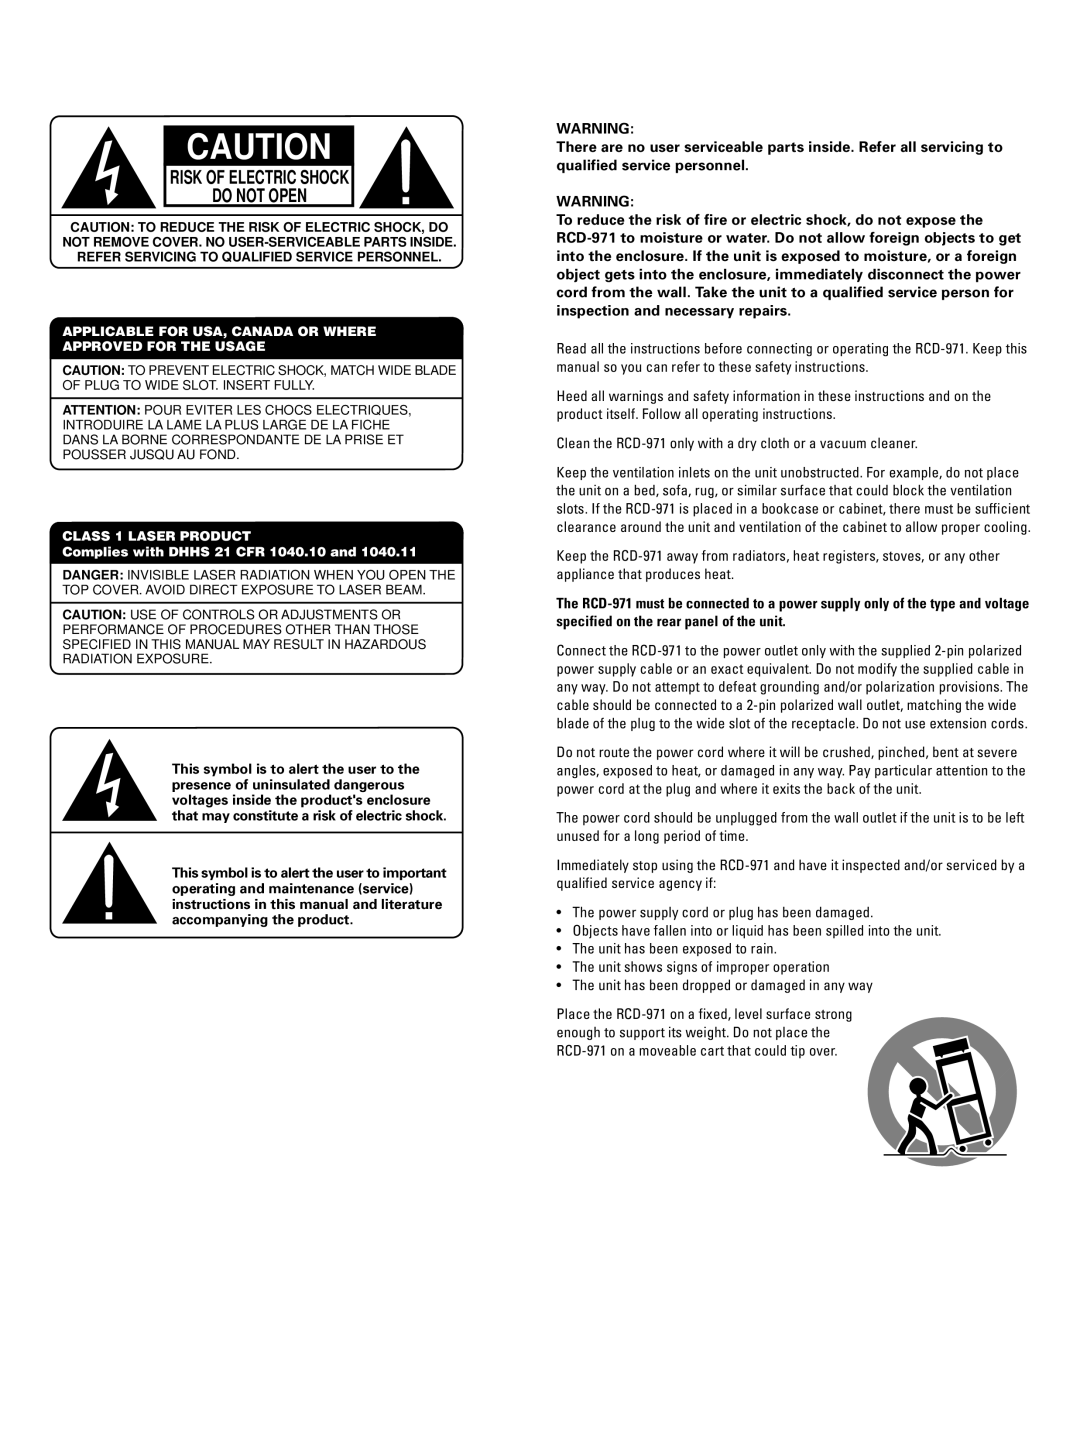 Rotel RCD-971 owner manual Risk Of Electric Shock Do Not Open 